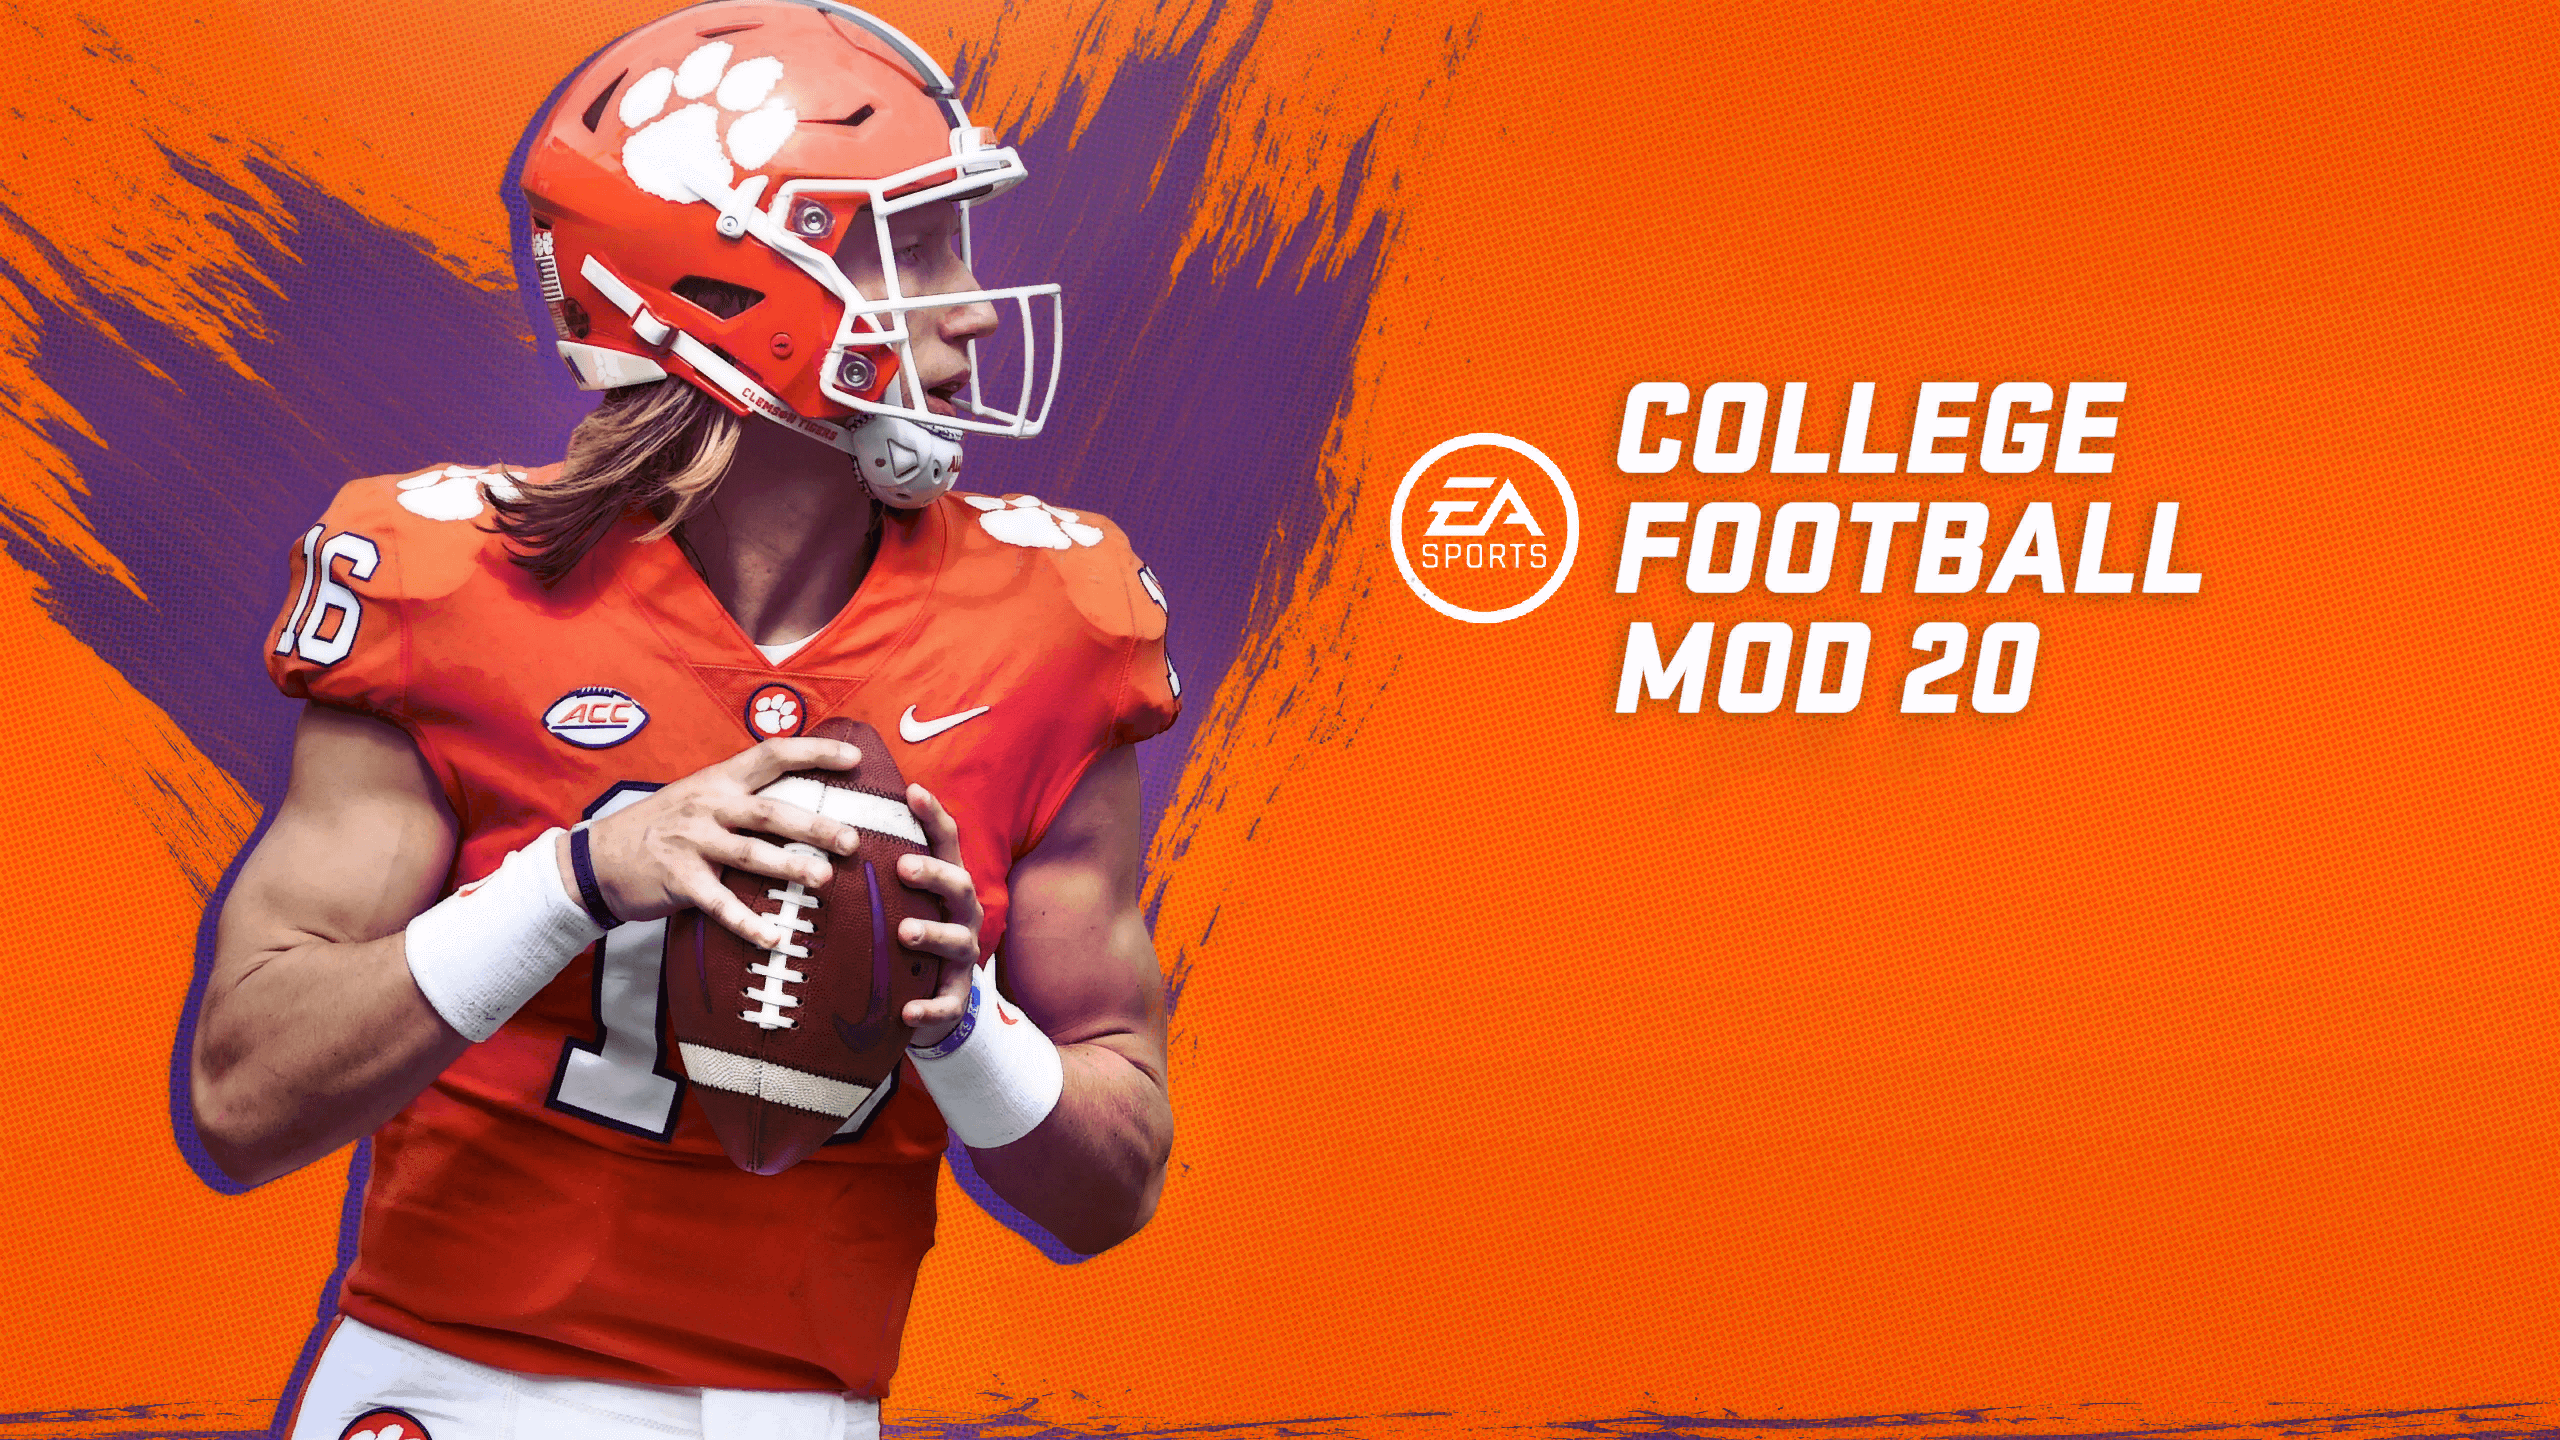 College Football Mod 20 v1.3 Available For Madden NFL 20 PC Users -  Operation Sports